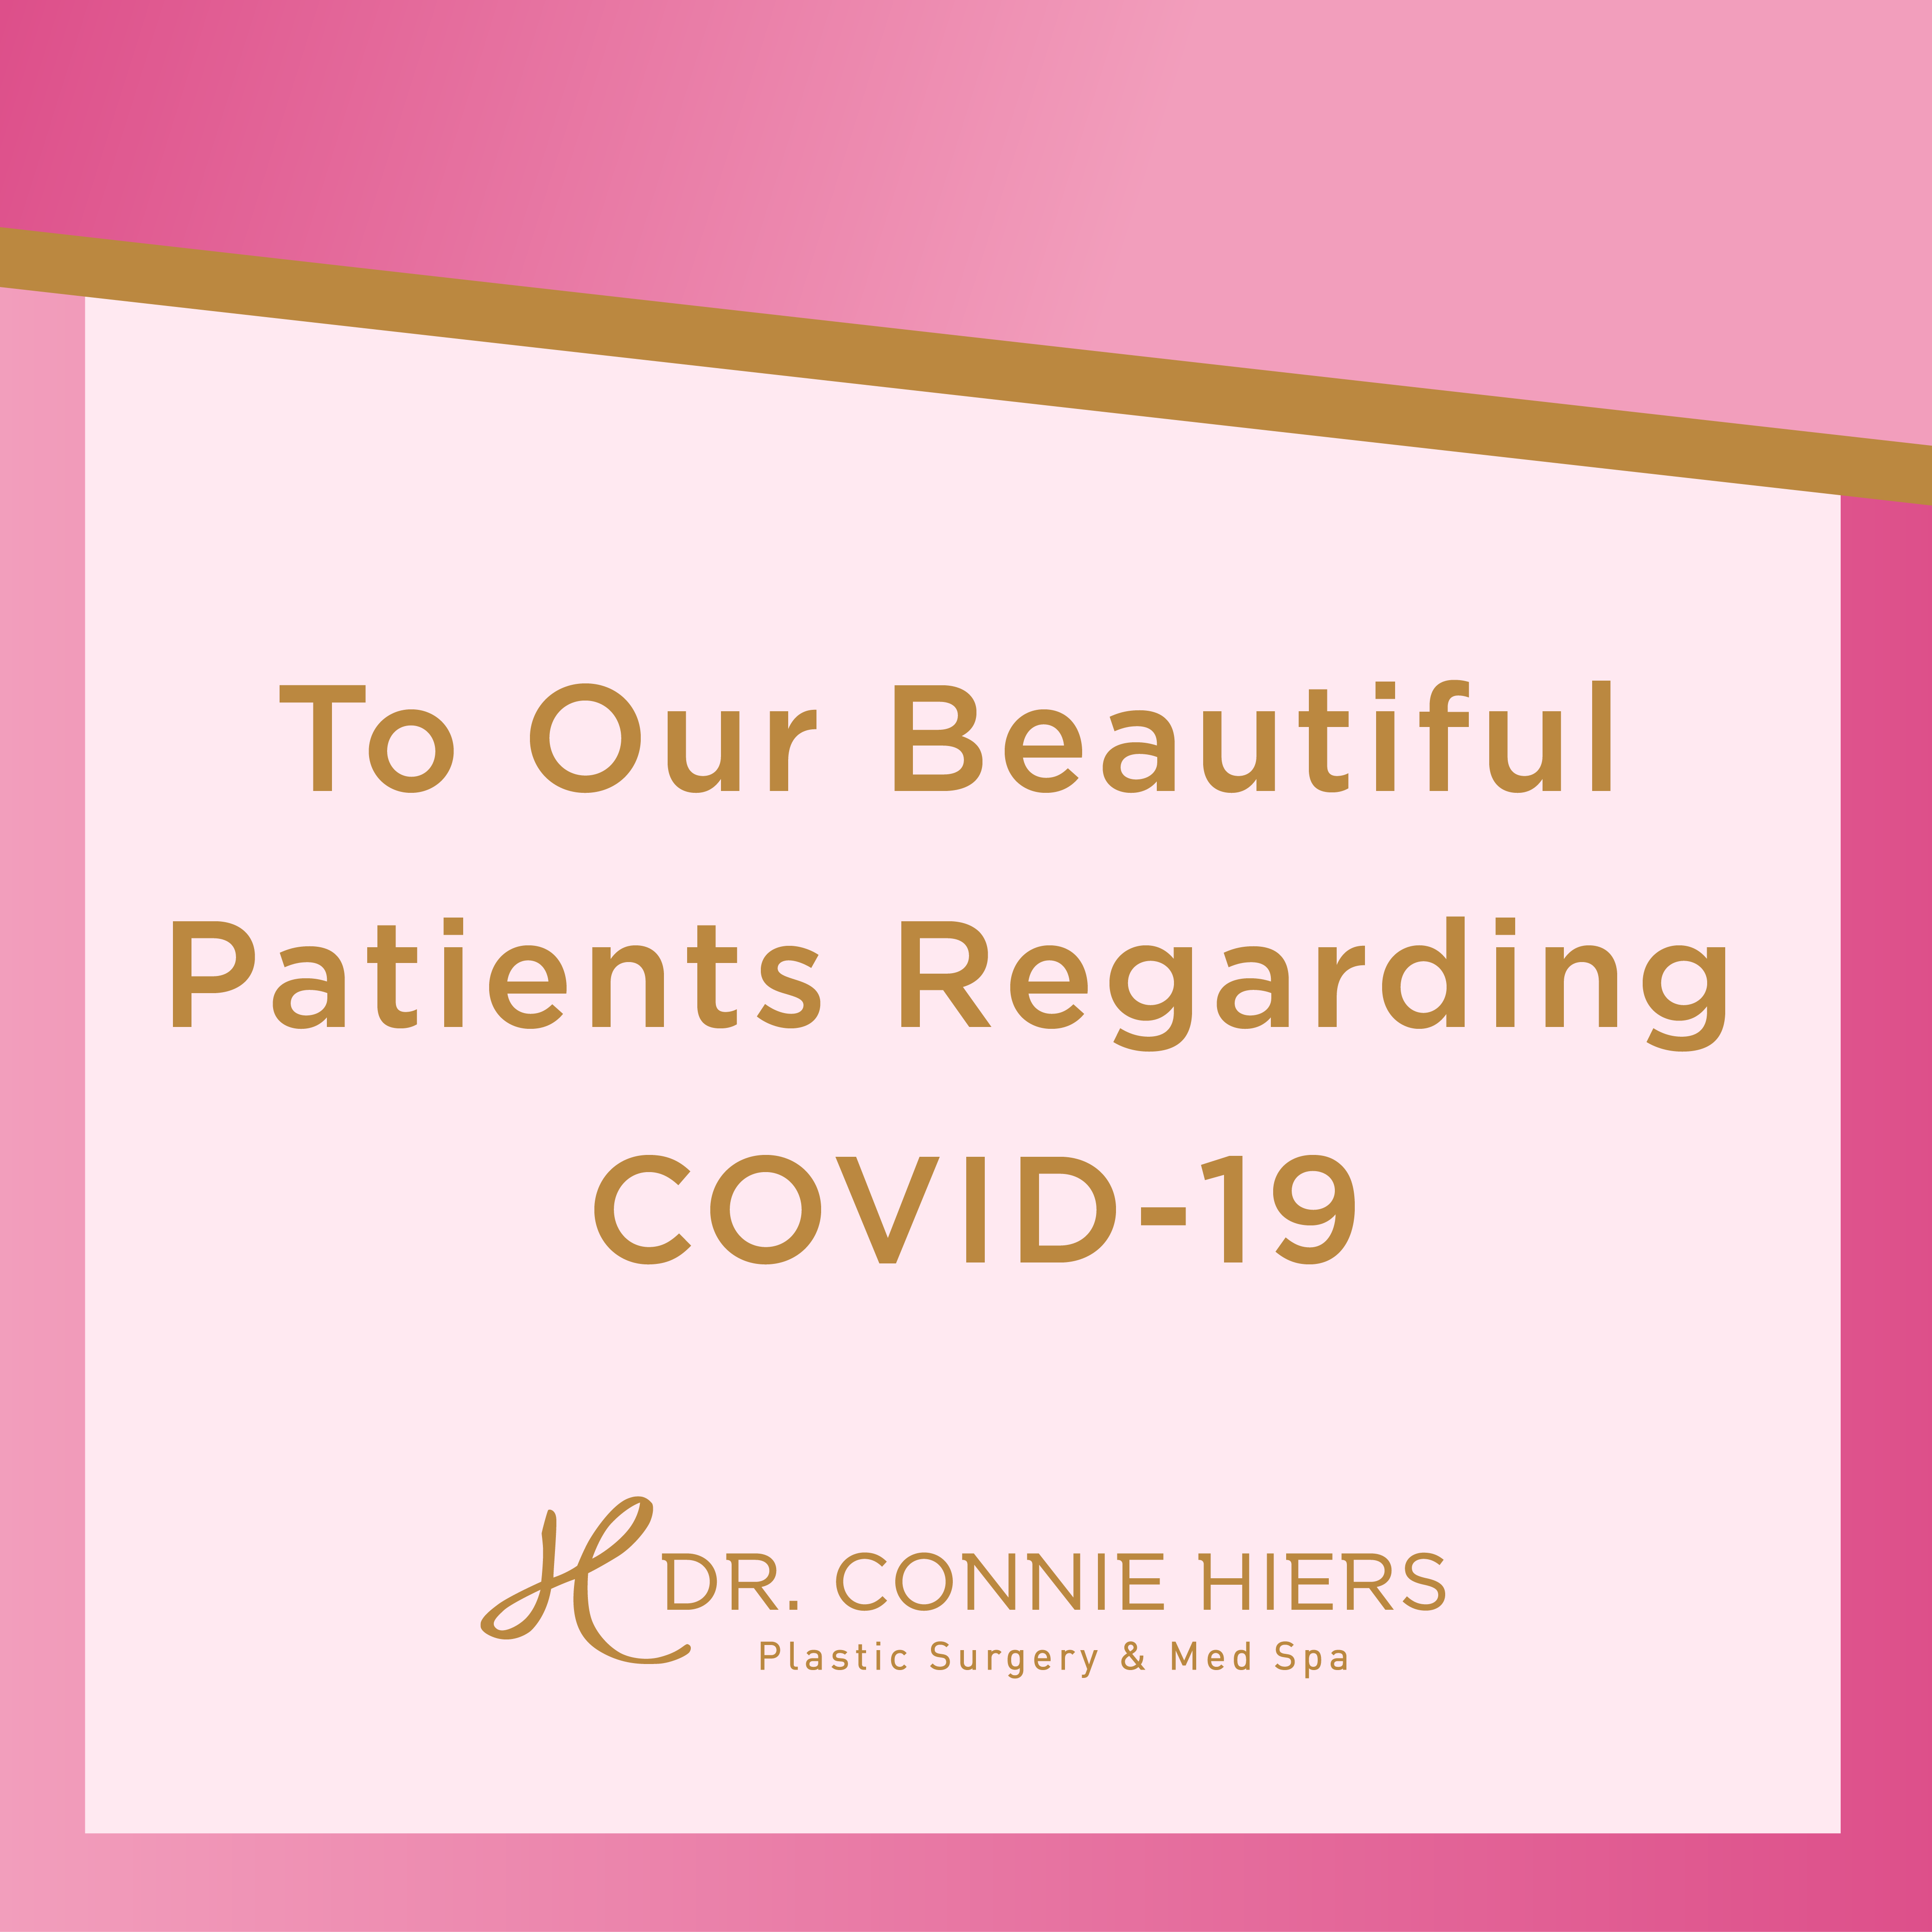 To Our Beautiful Patients Regarding COVID-19